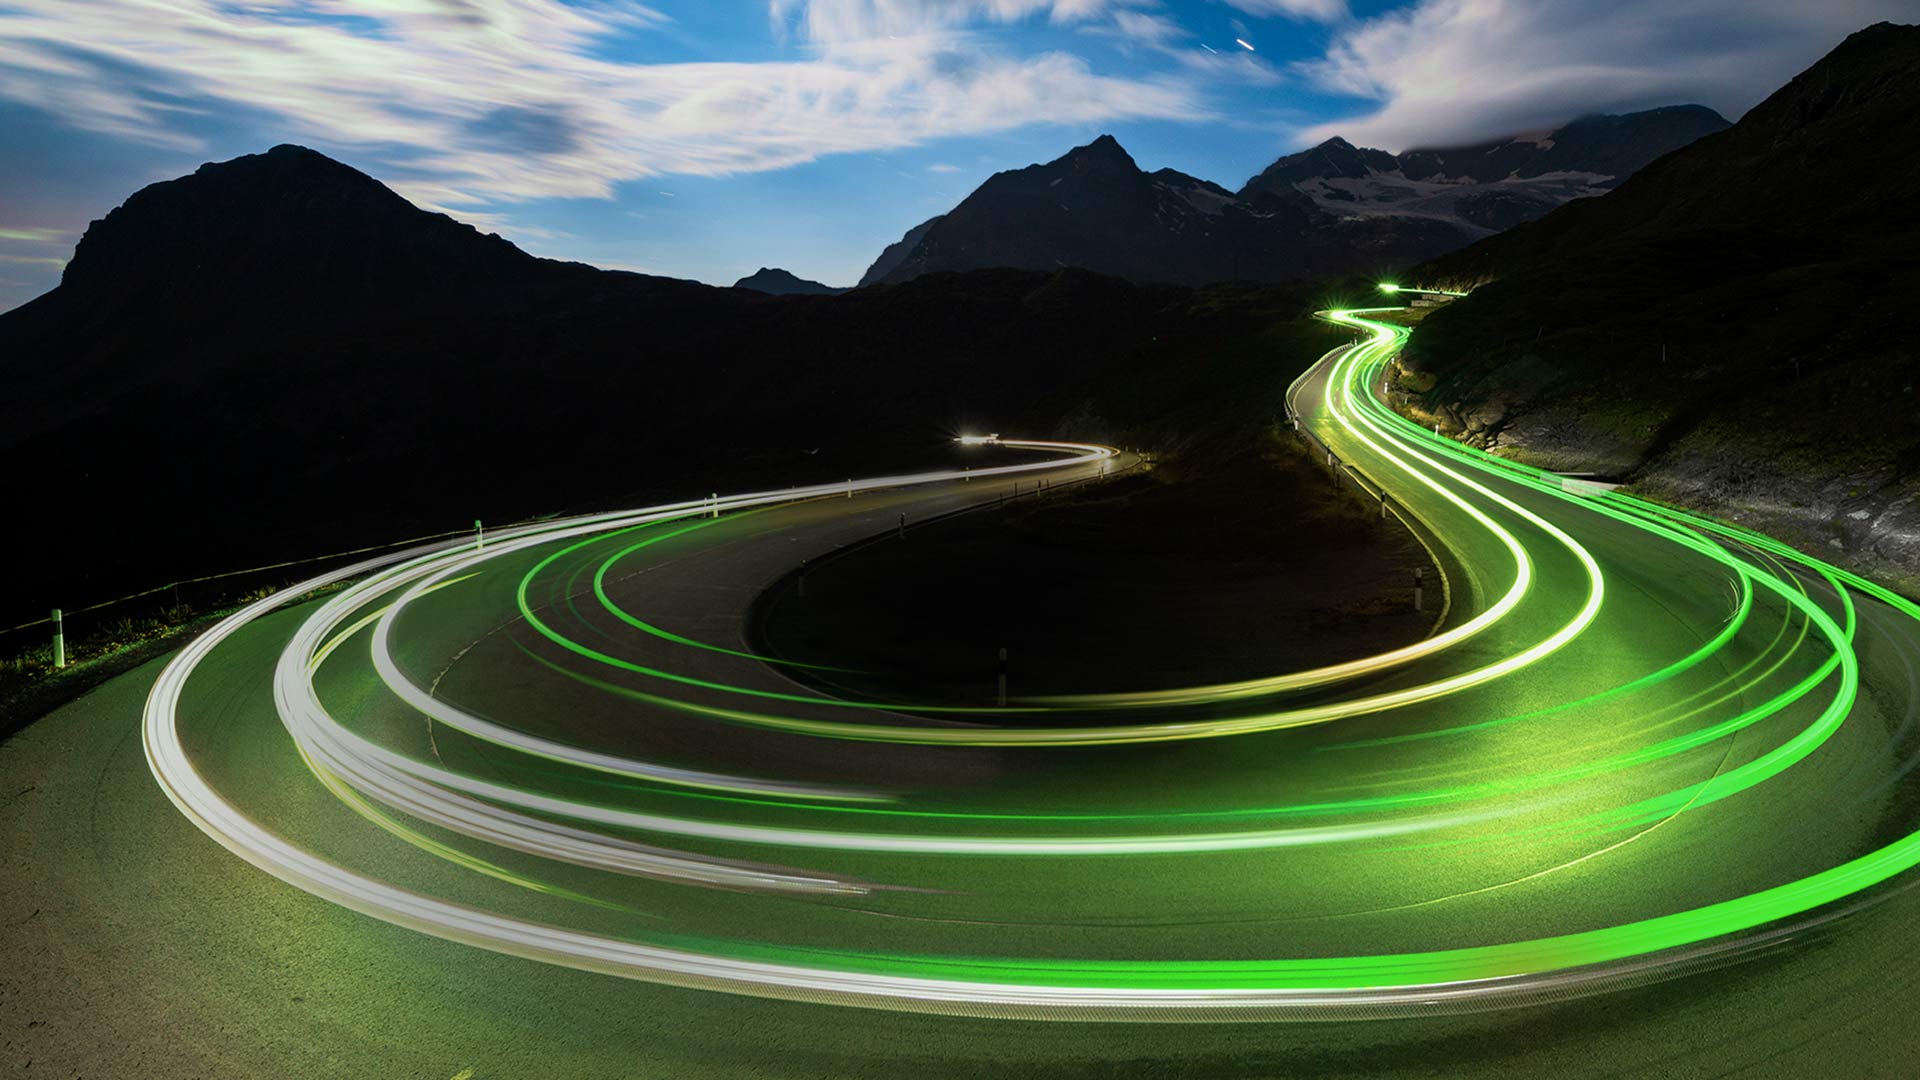 Light trails on a mountain road